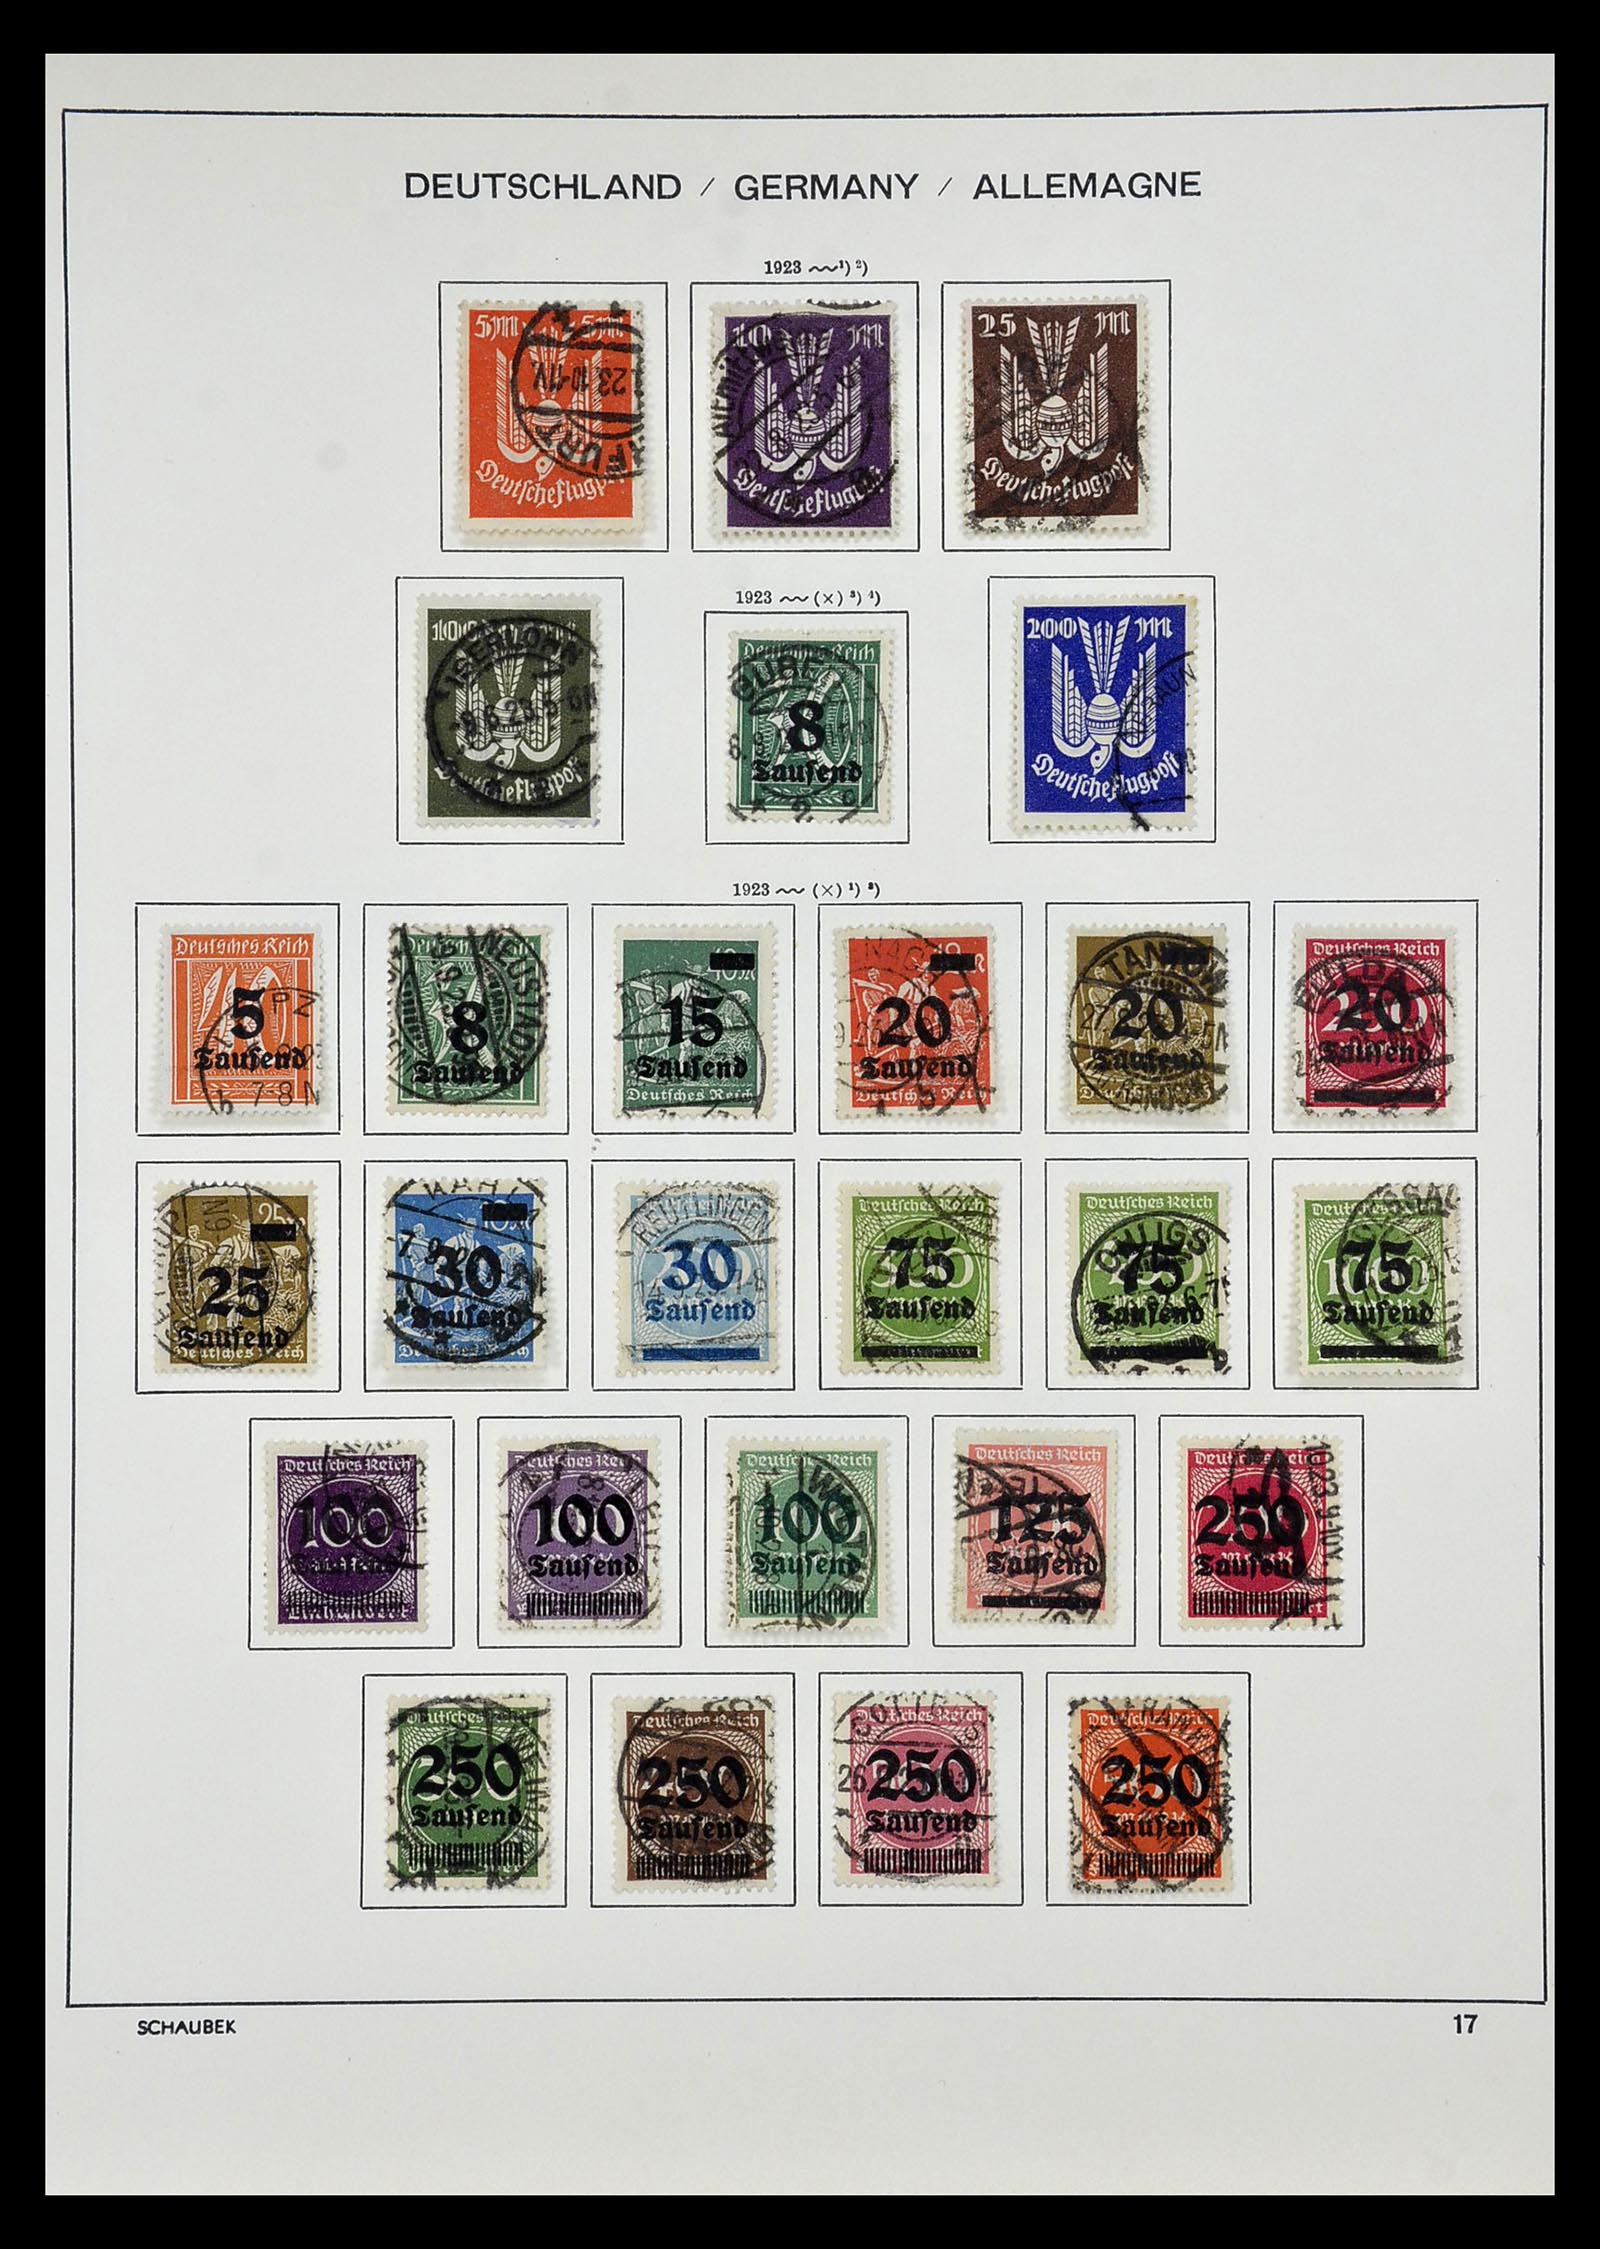 35006 011 - Stamp Collection 35006 German Reich infla 1919-1923.